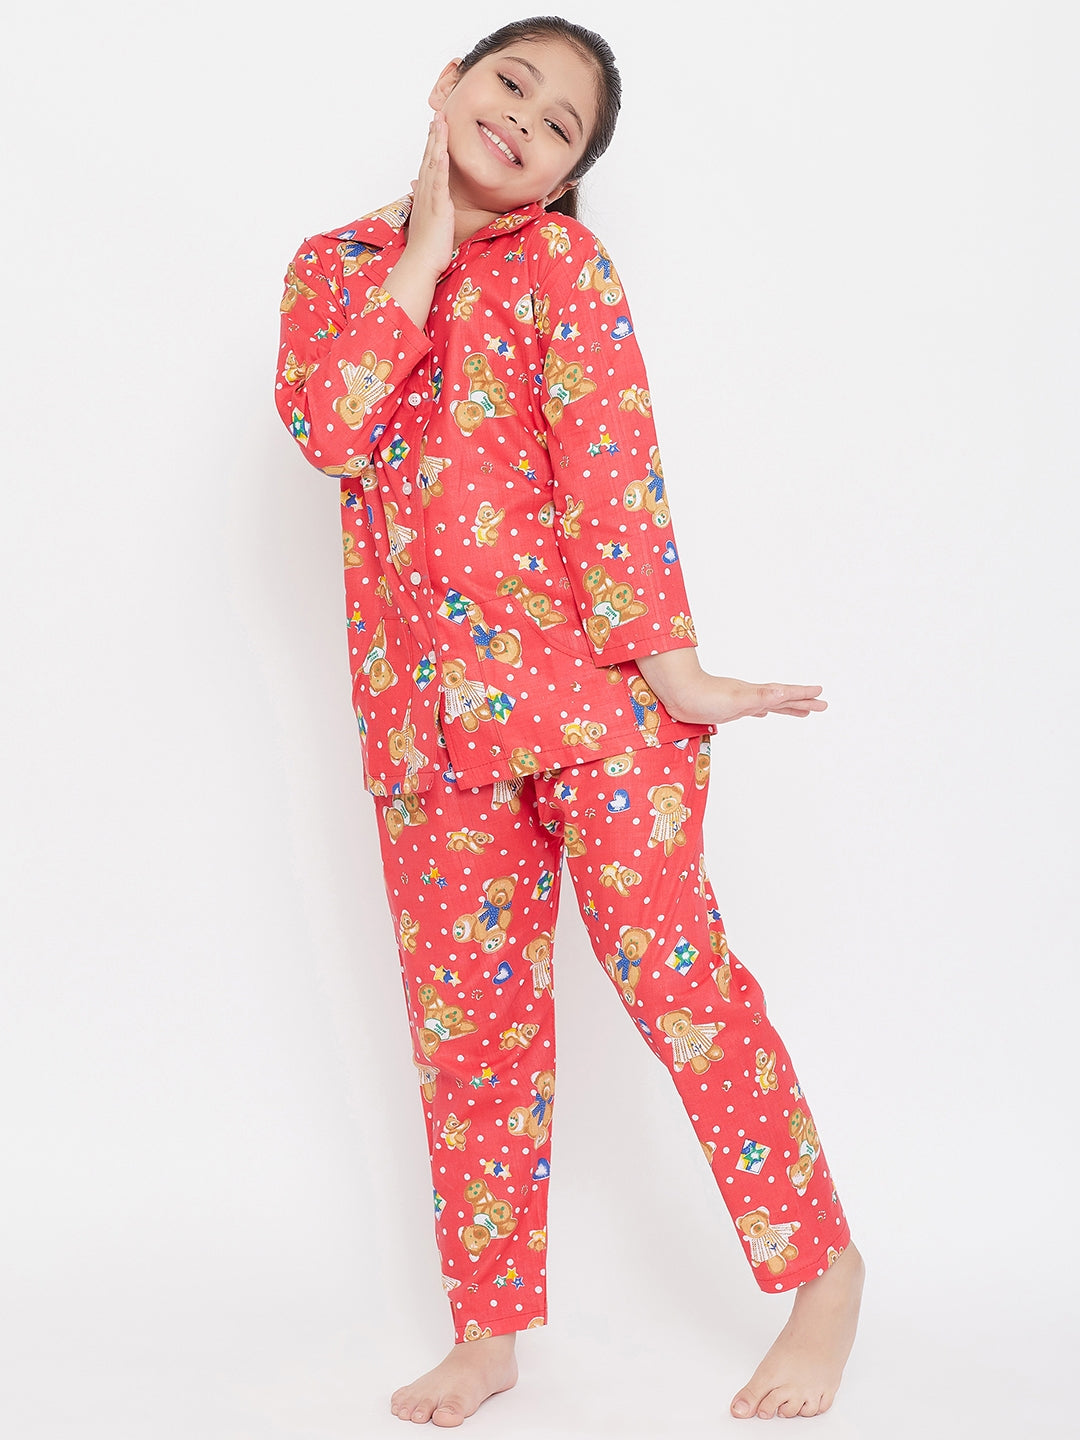 Girl's Red & Peach Printed Rayon Nightsuit (Pack of 2) - NOZ2TOZ KIDS